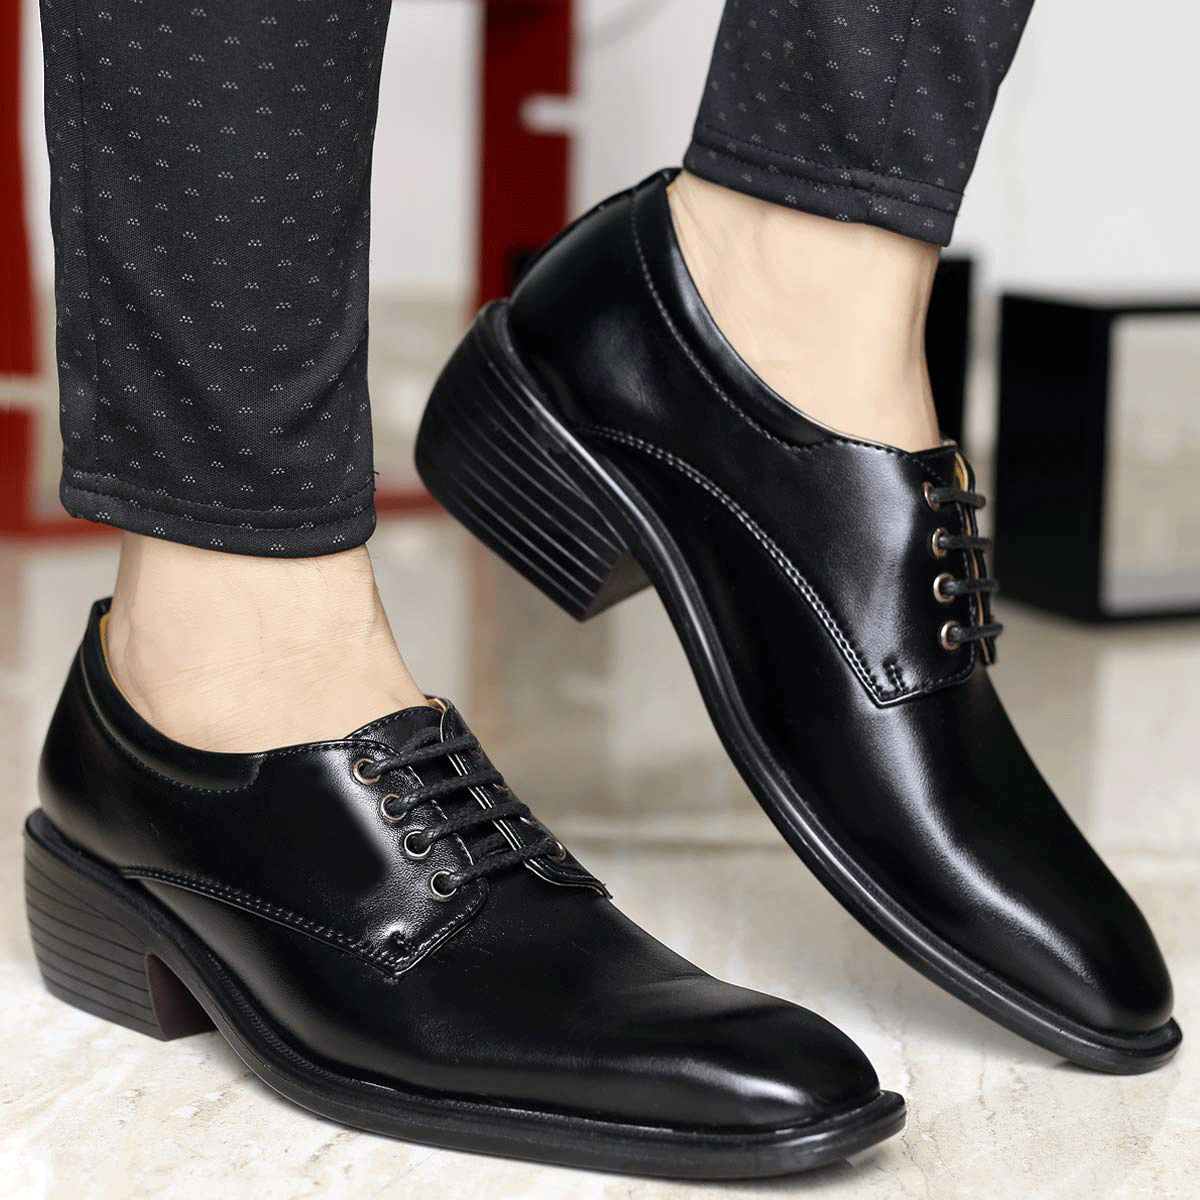 Classic Pattern Height Increasing Black Casual, Formal Office Wear Derby Shoes-Unique and Classy